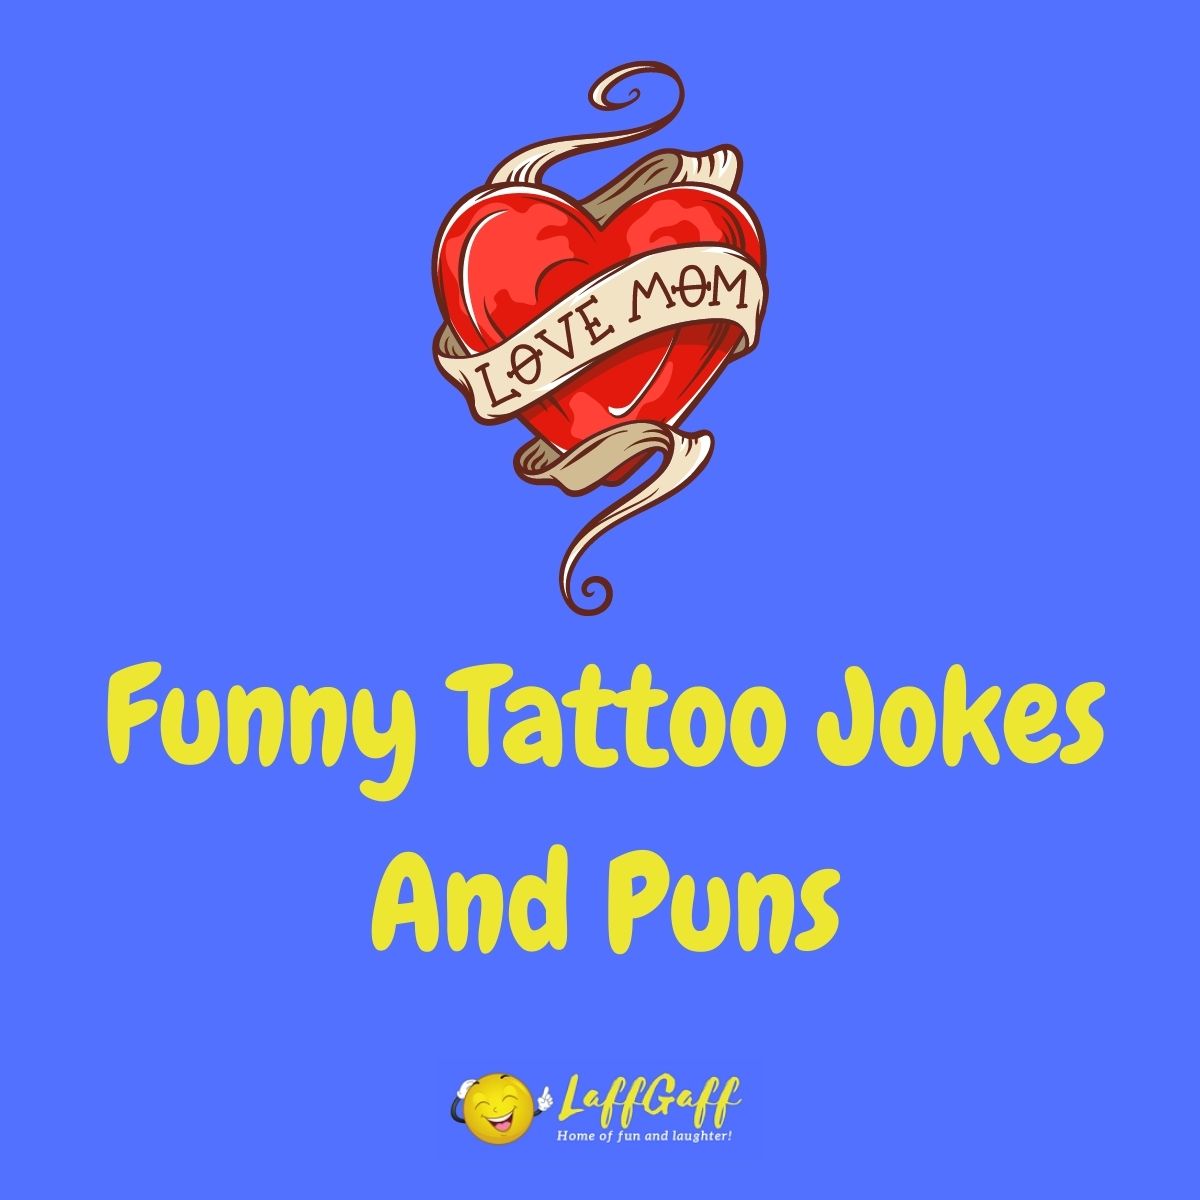 Featured image for a page of funny tattoo jokes and puns.